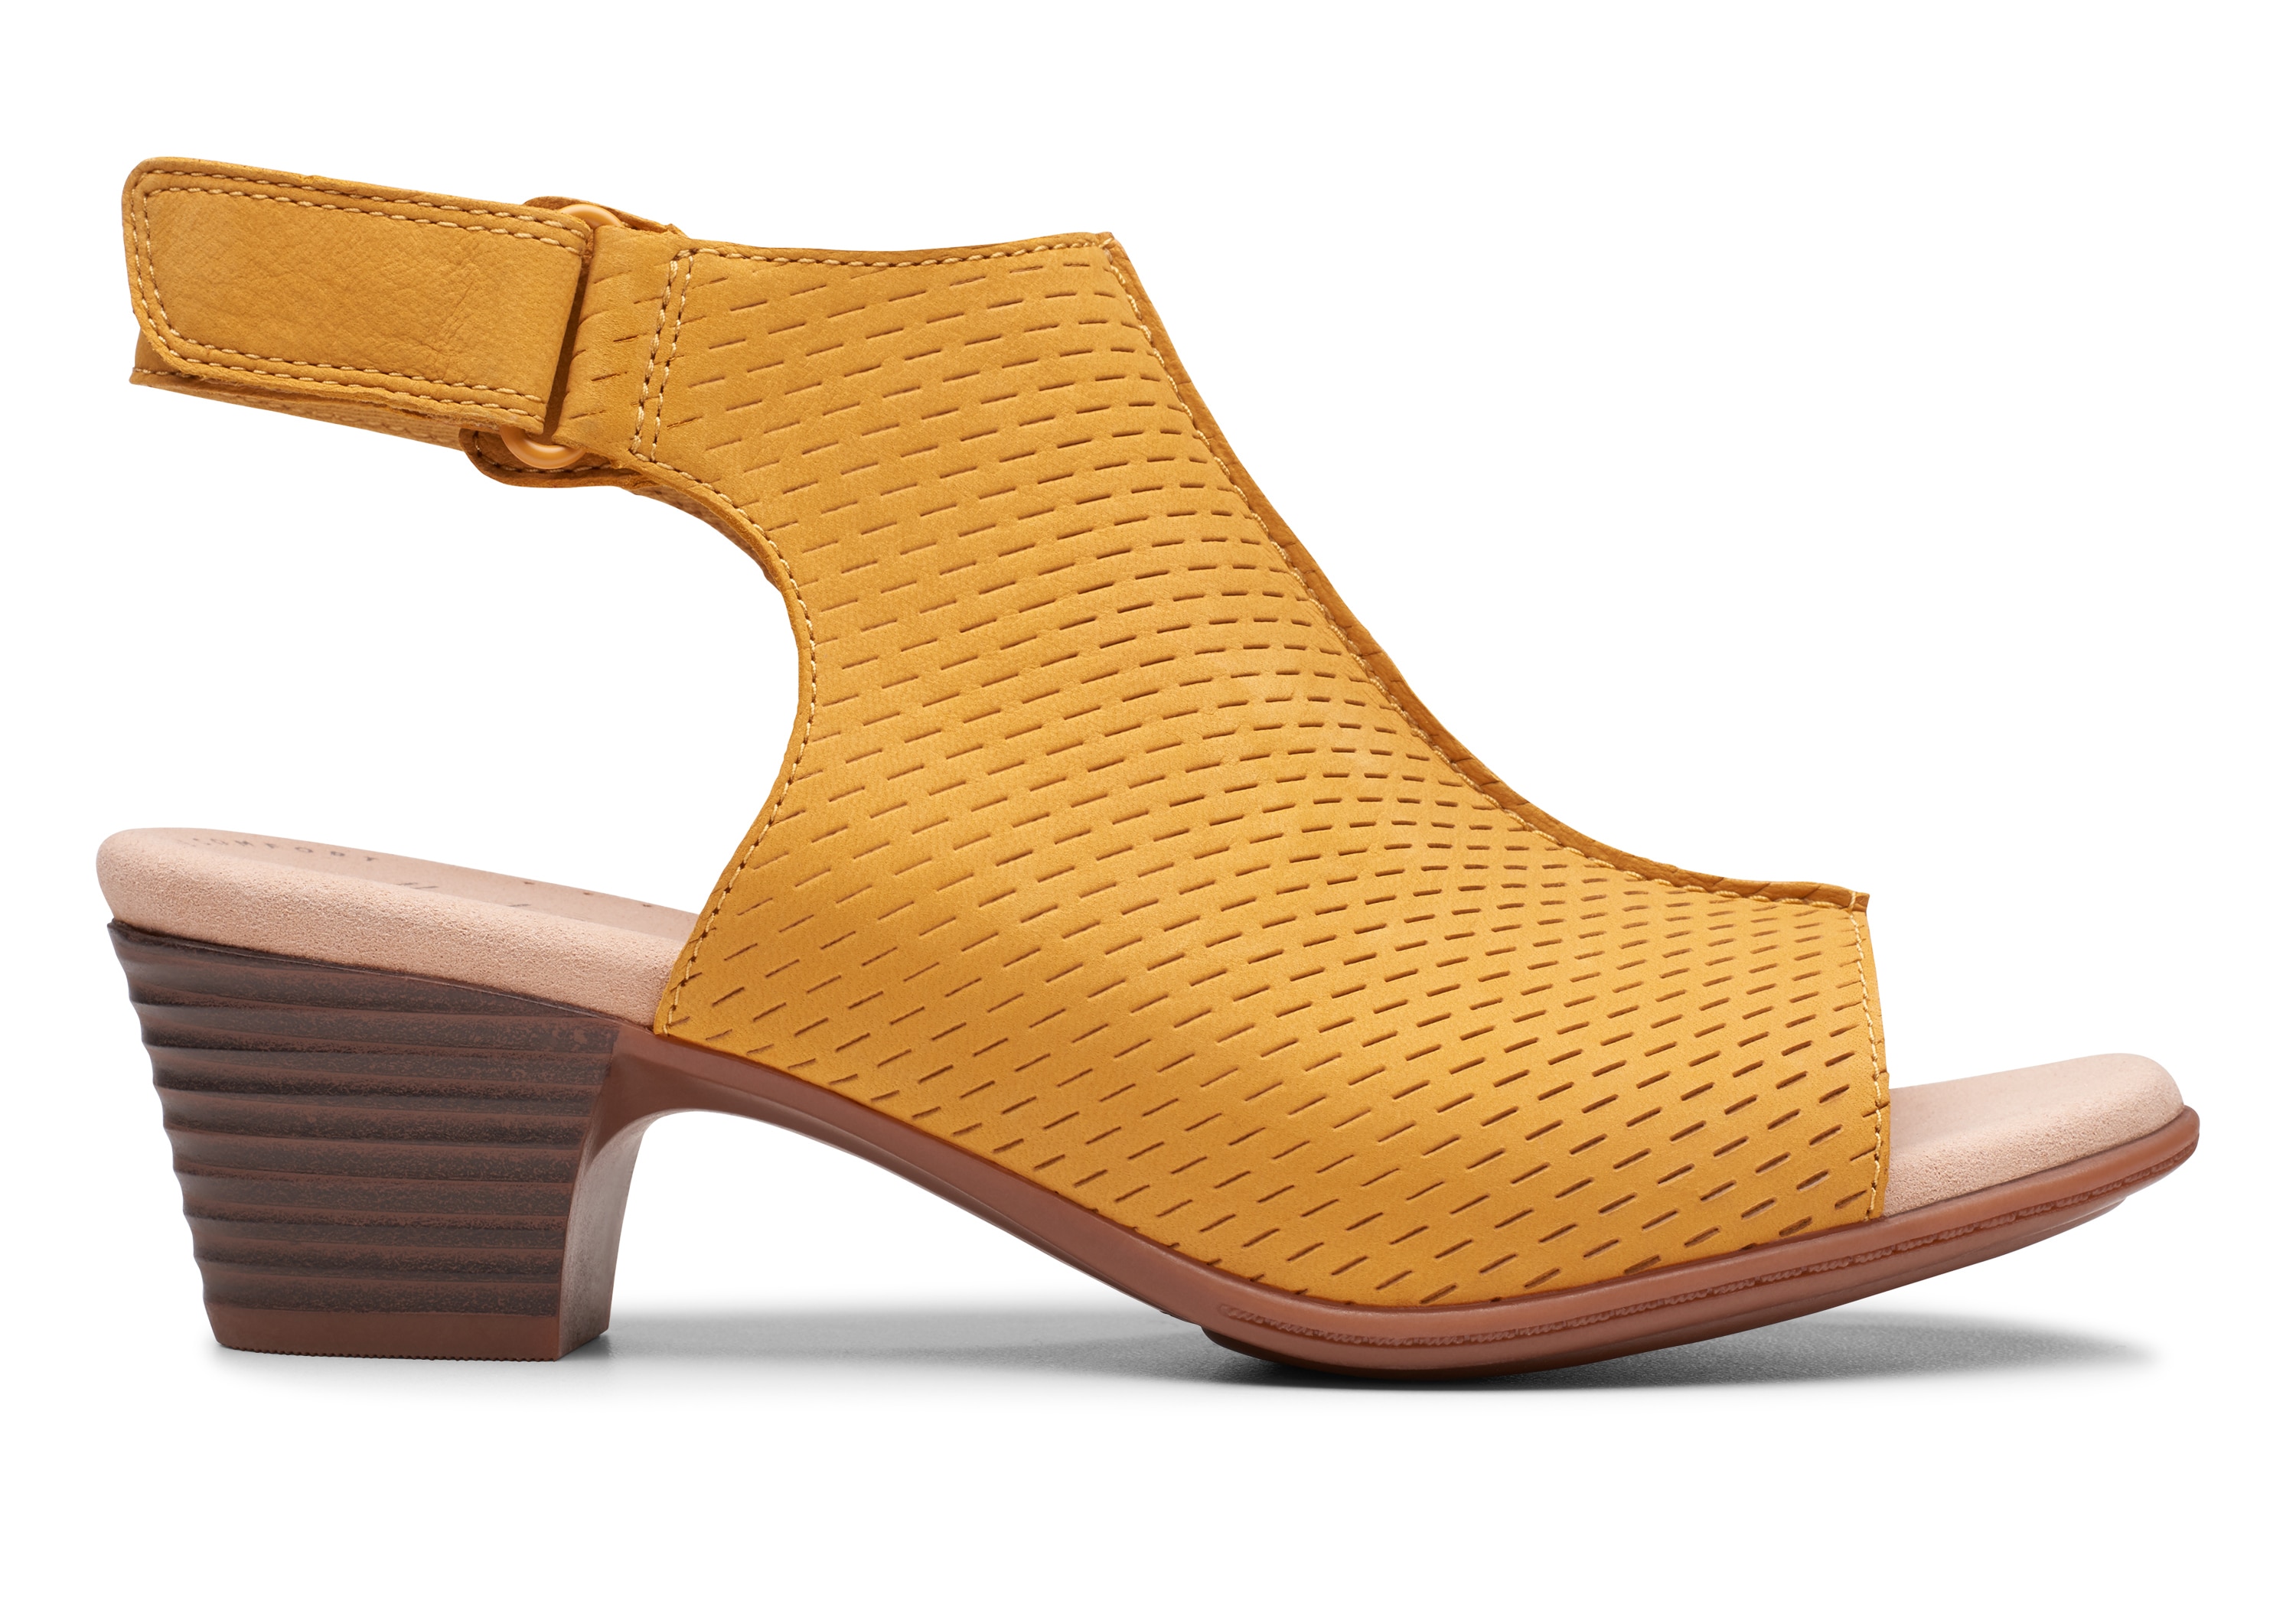 clarks nubuck leather perforated heeled sandals